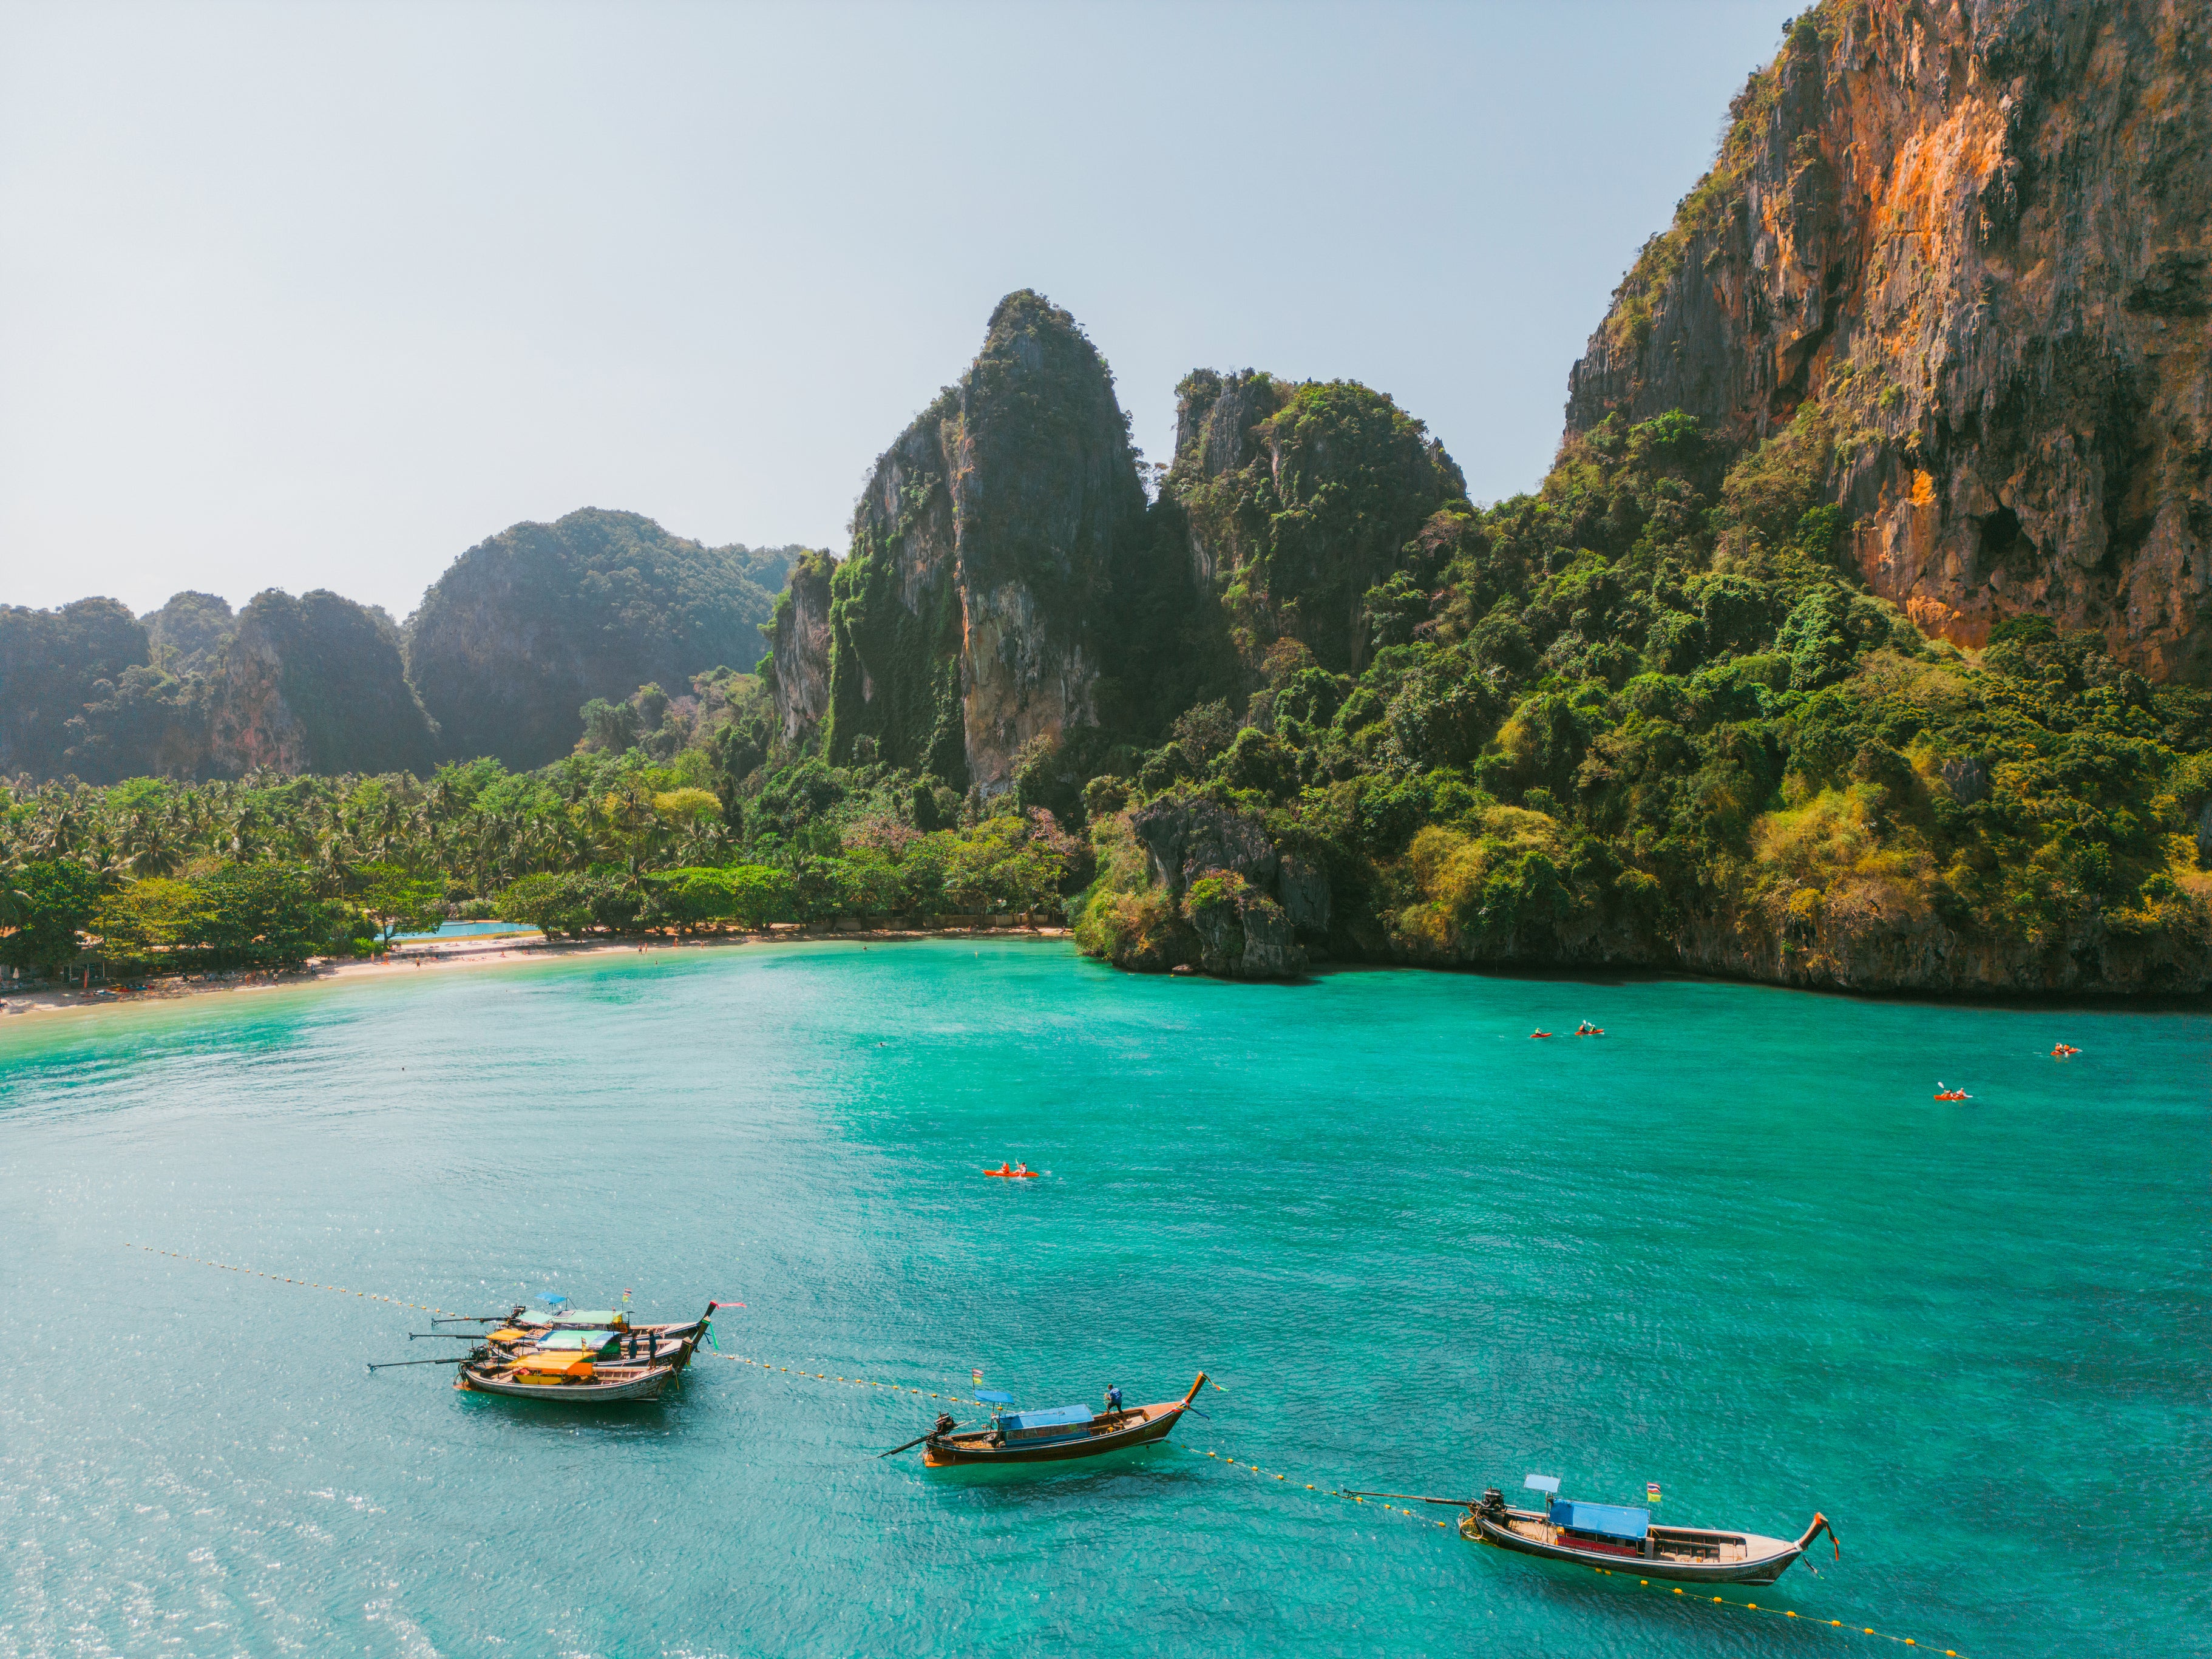 With temperatures in the low 30s, it’s no wonder backpackers flock to Phuket